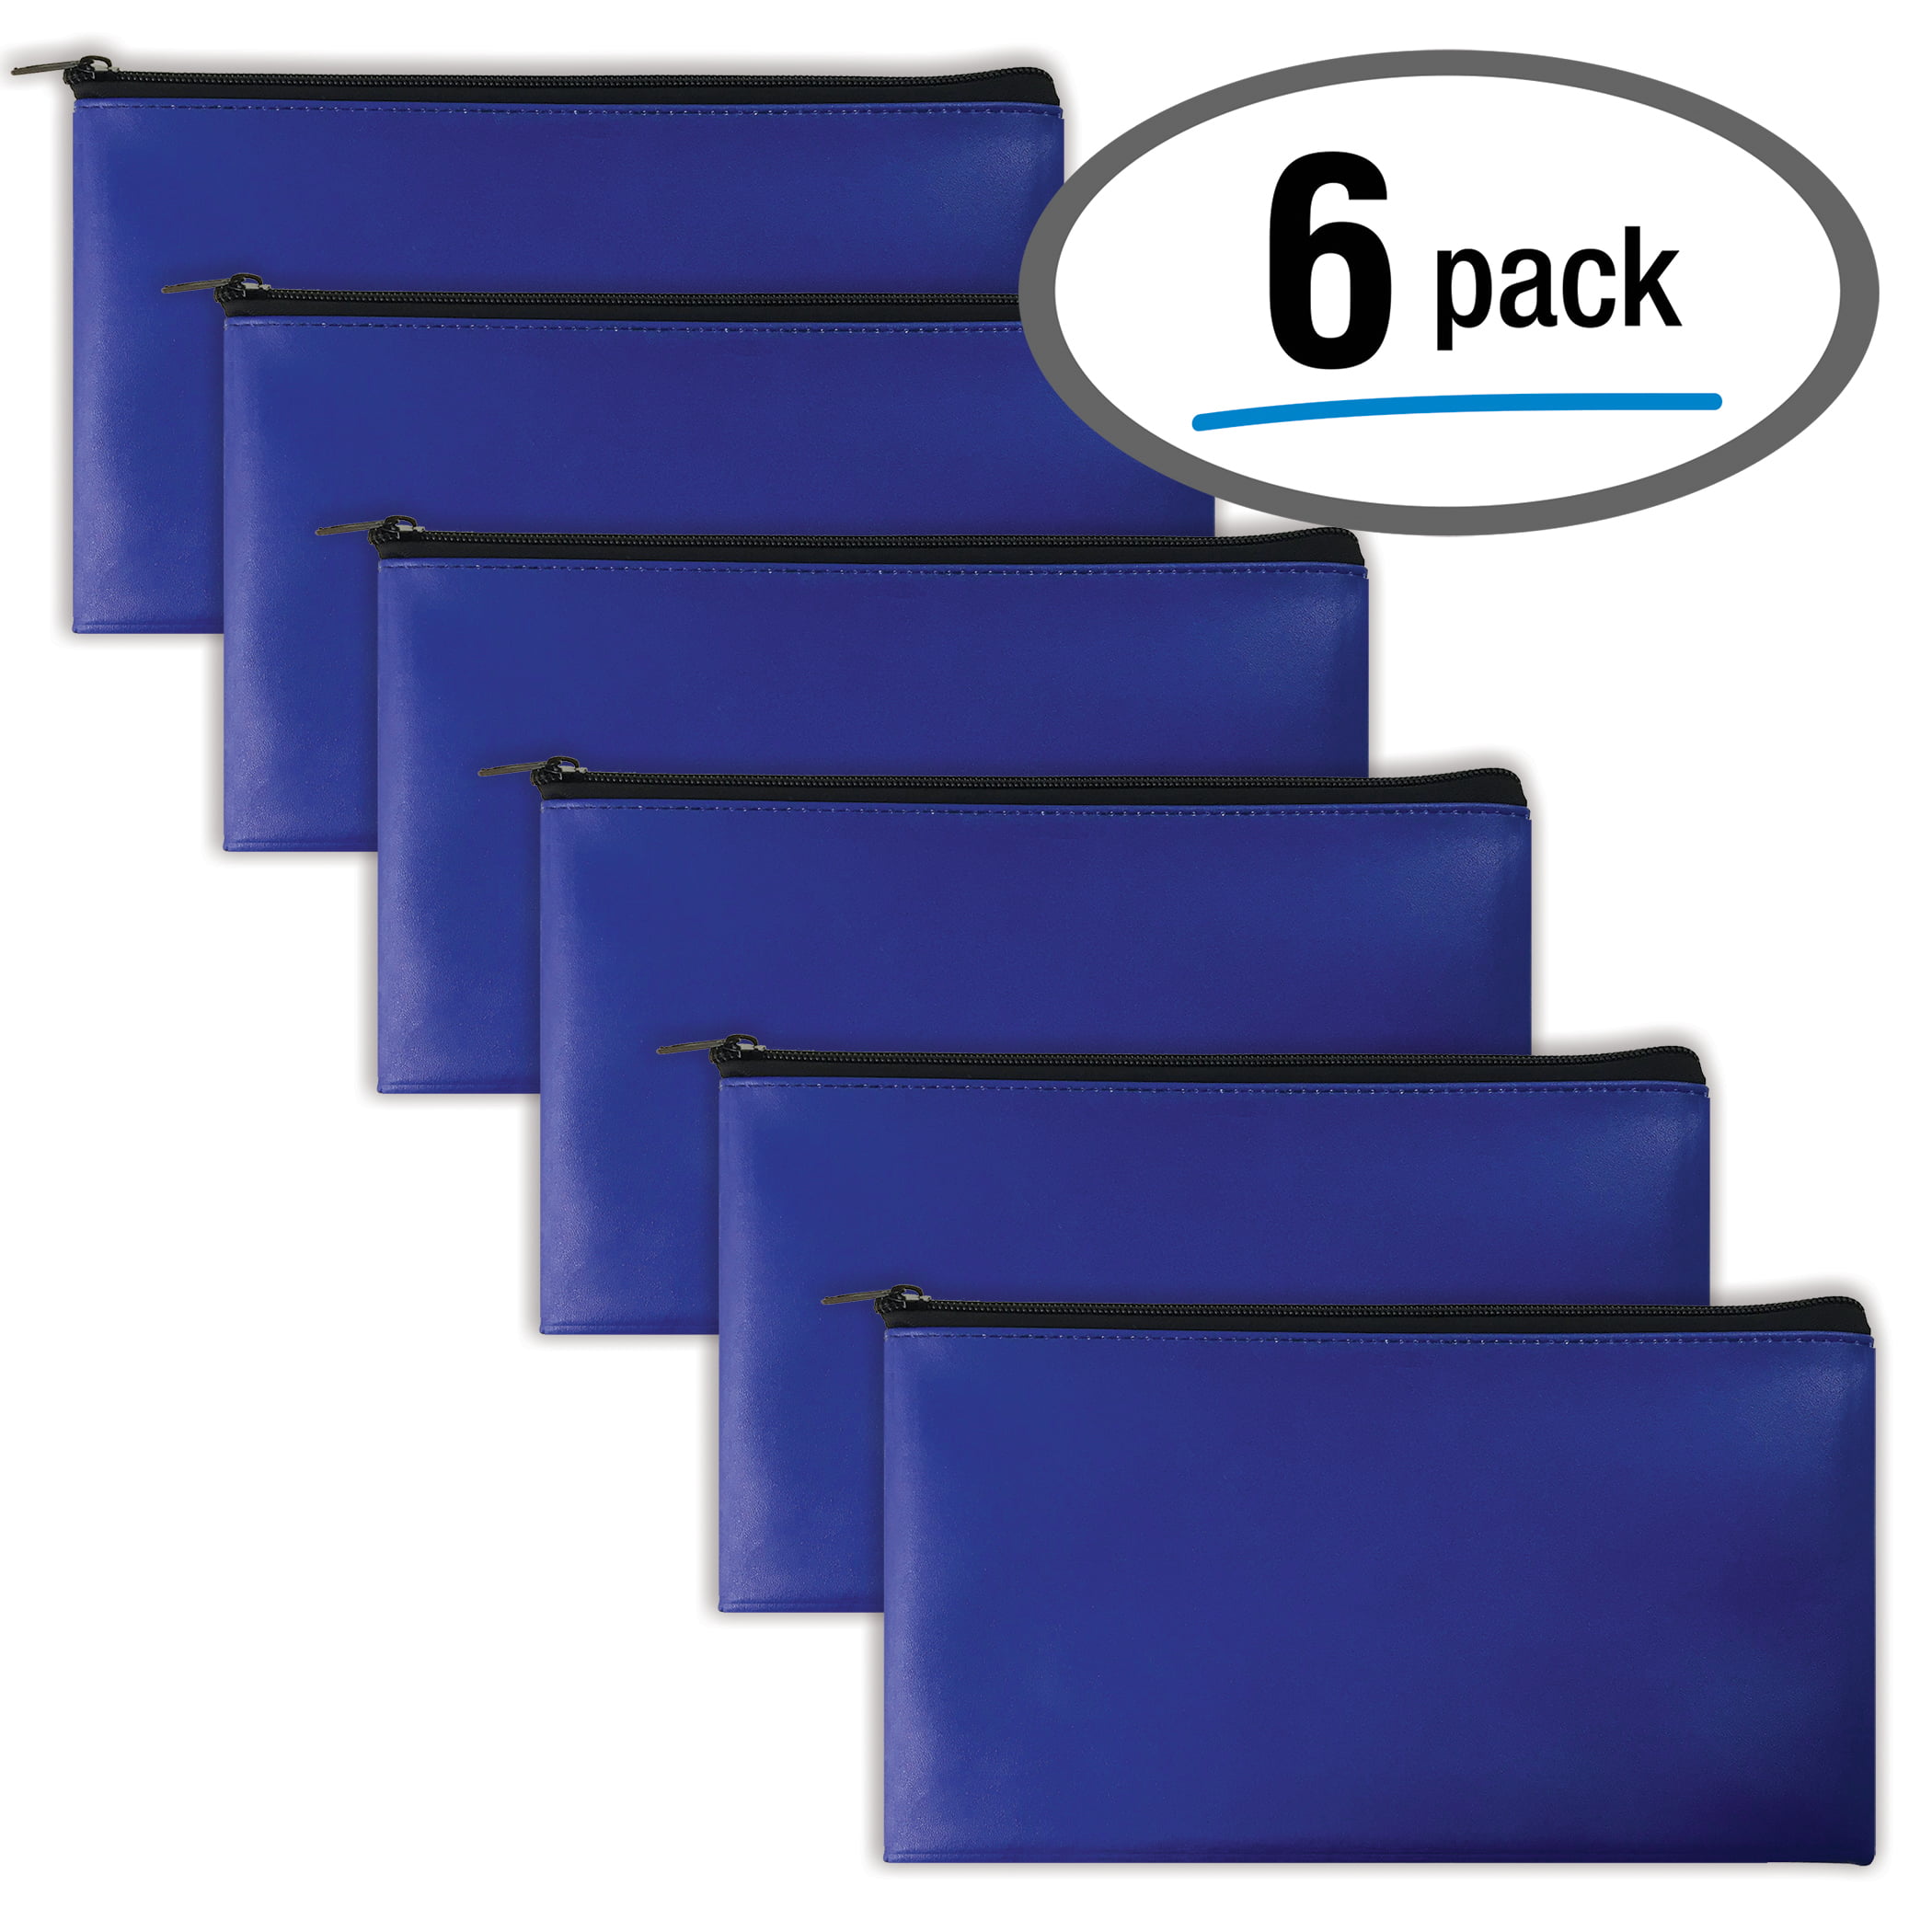 6 Pack, Zippered Security Bank Deposit Bag, by Better Office Products, Leatherette, Cash Bag ...